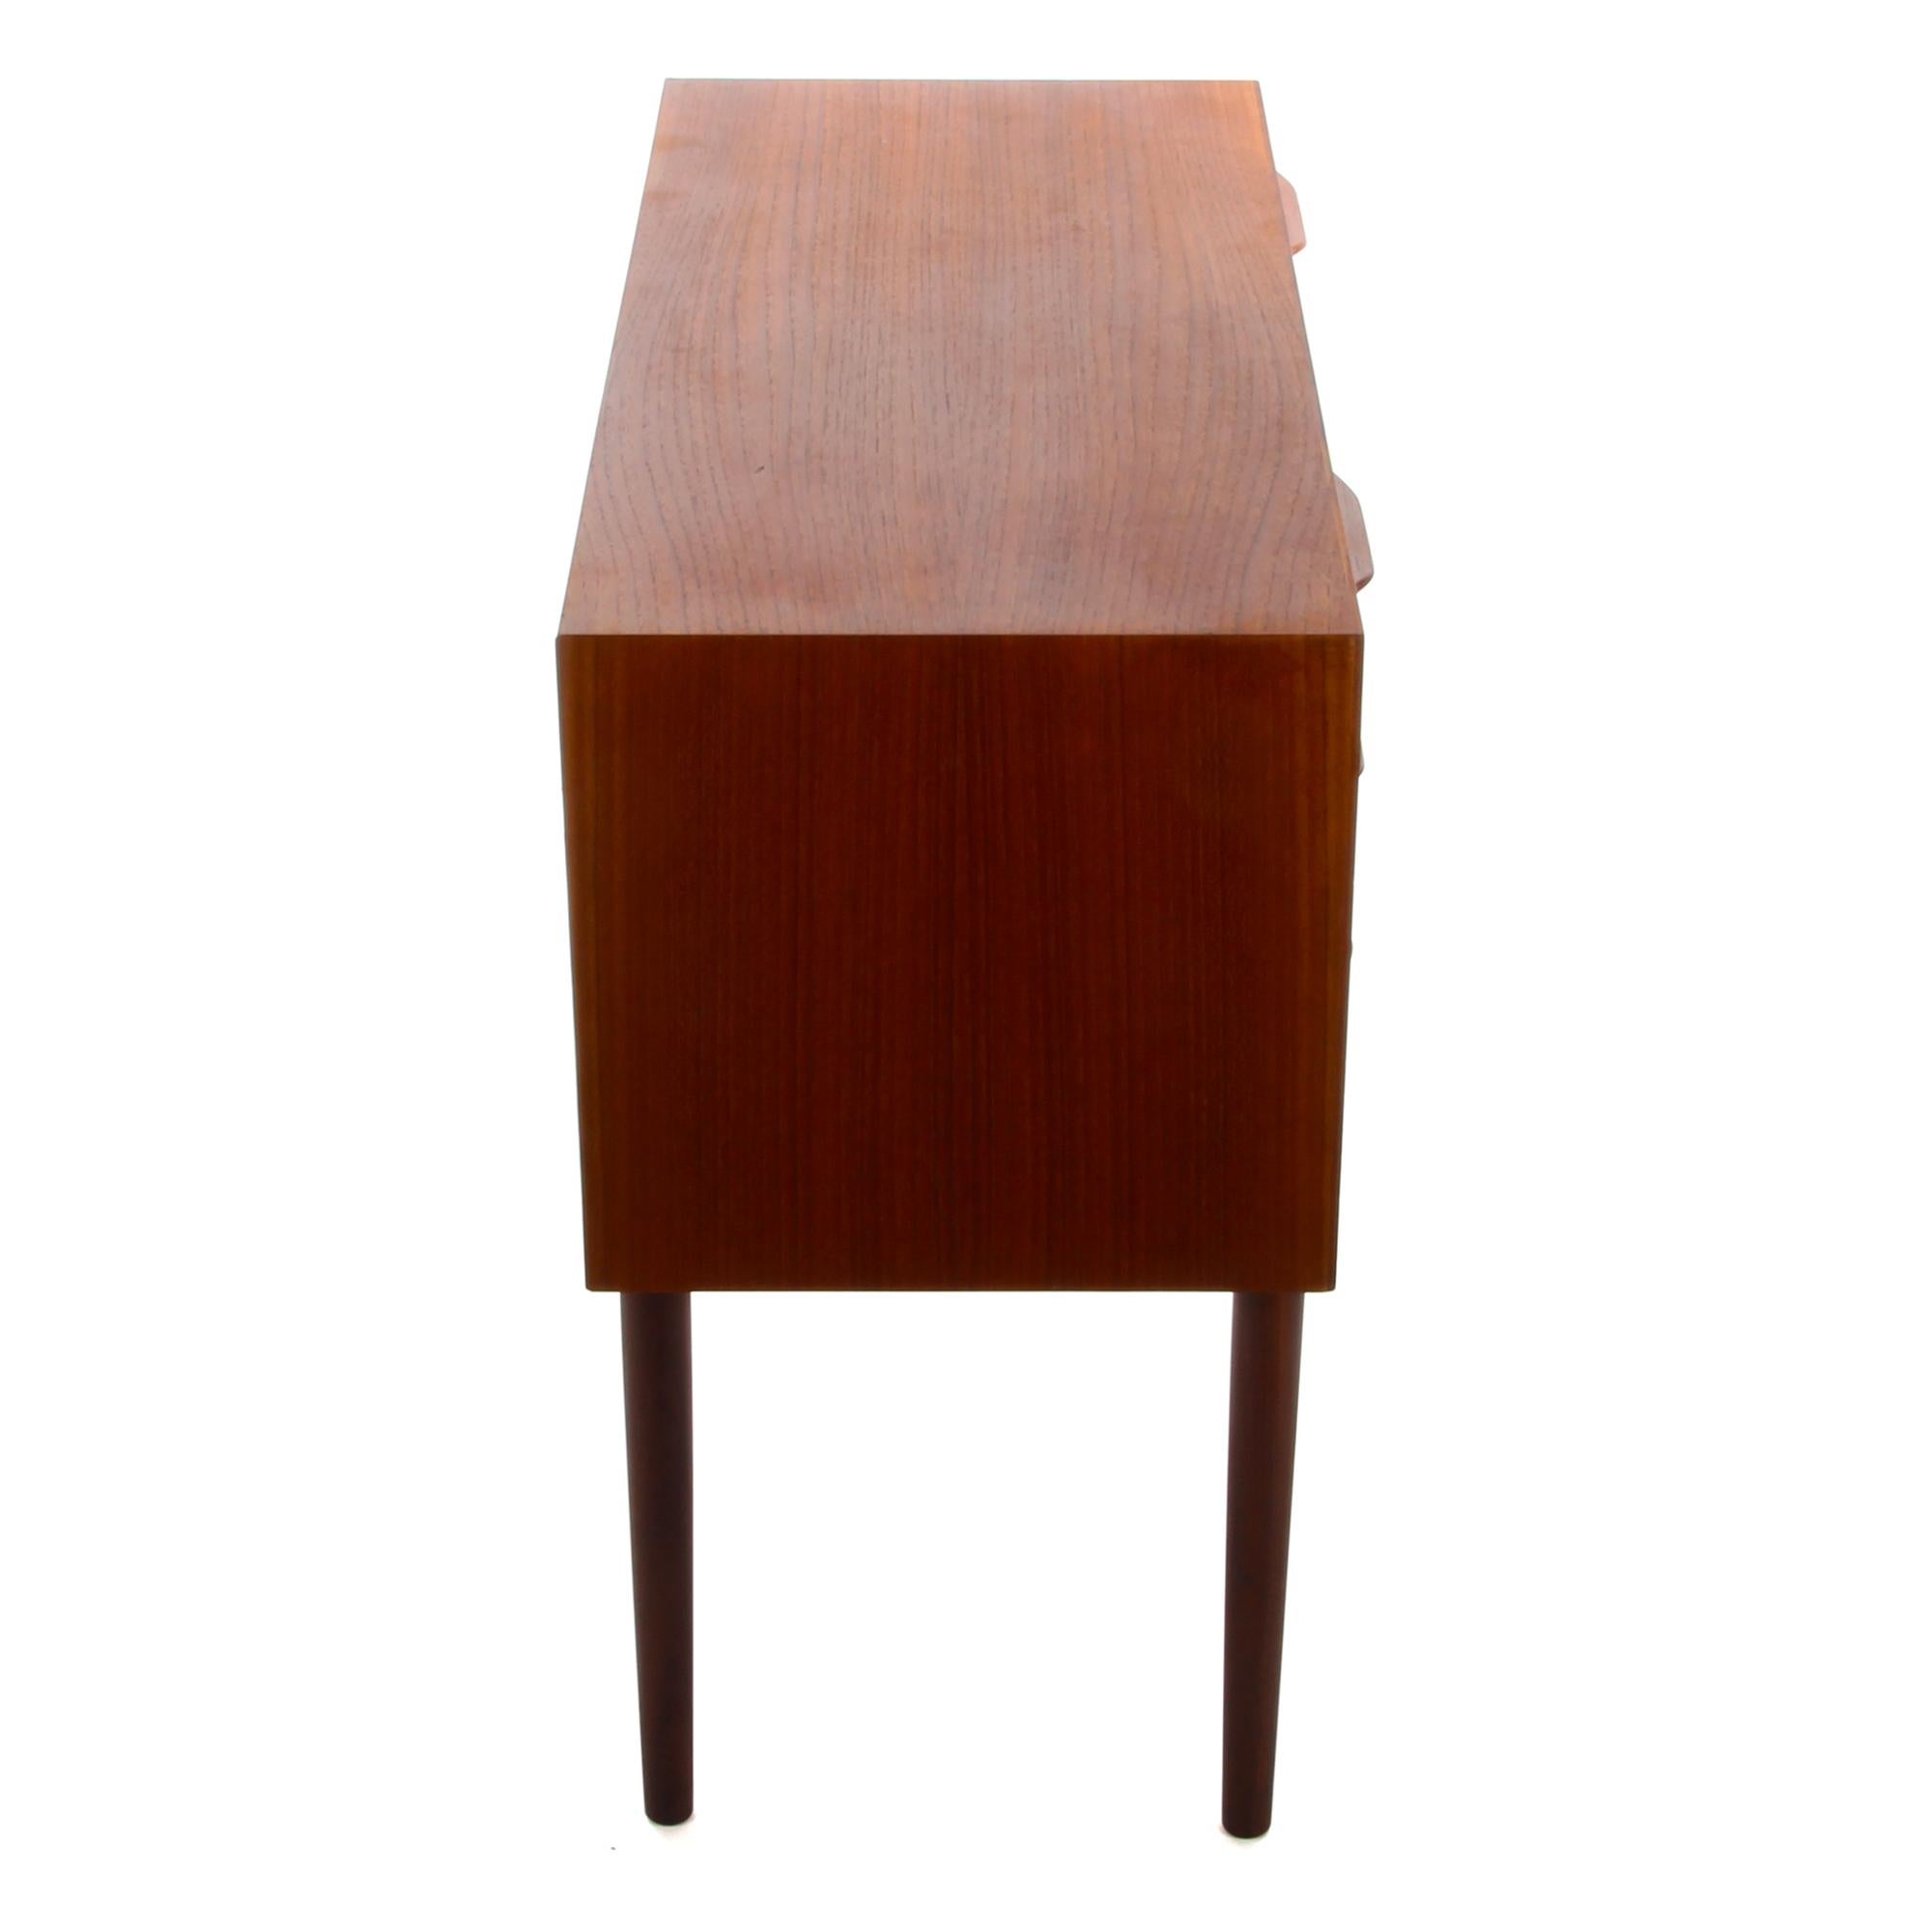 Mid-20th Century Teak Chest of Drawers from the 1960s, Danish Midcentury Dresser with Drawers